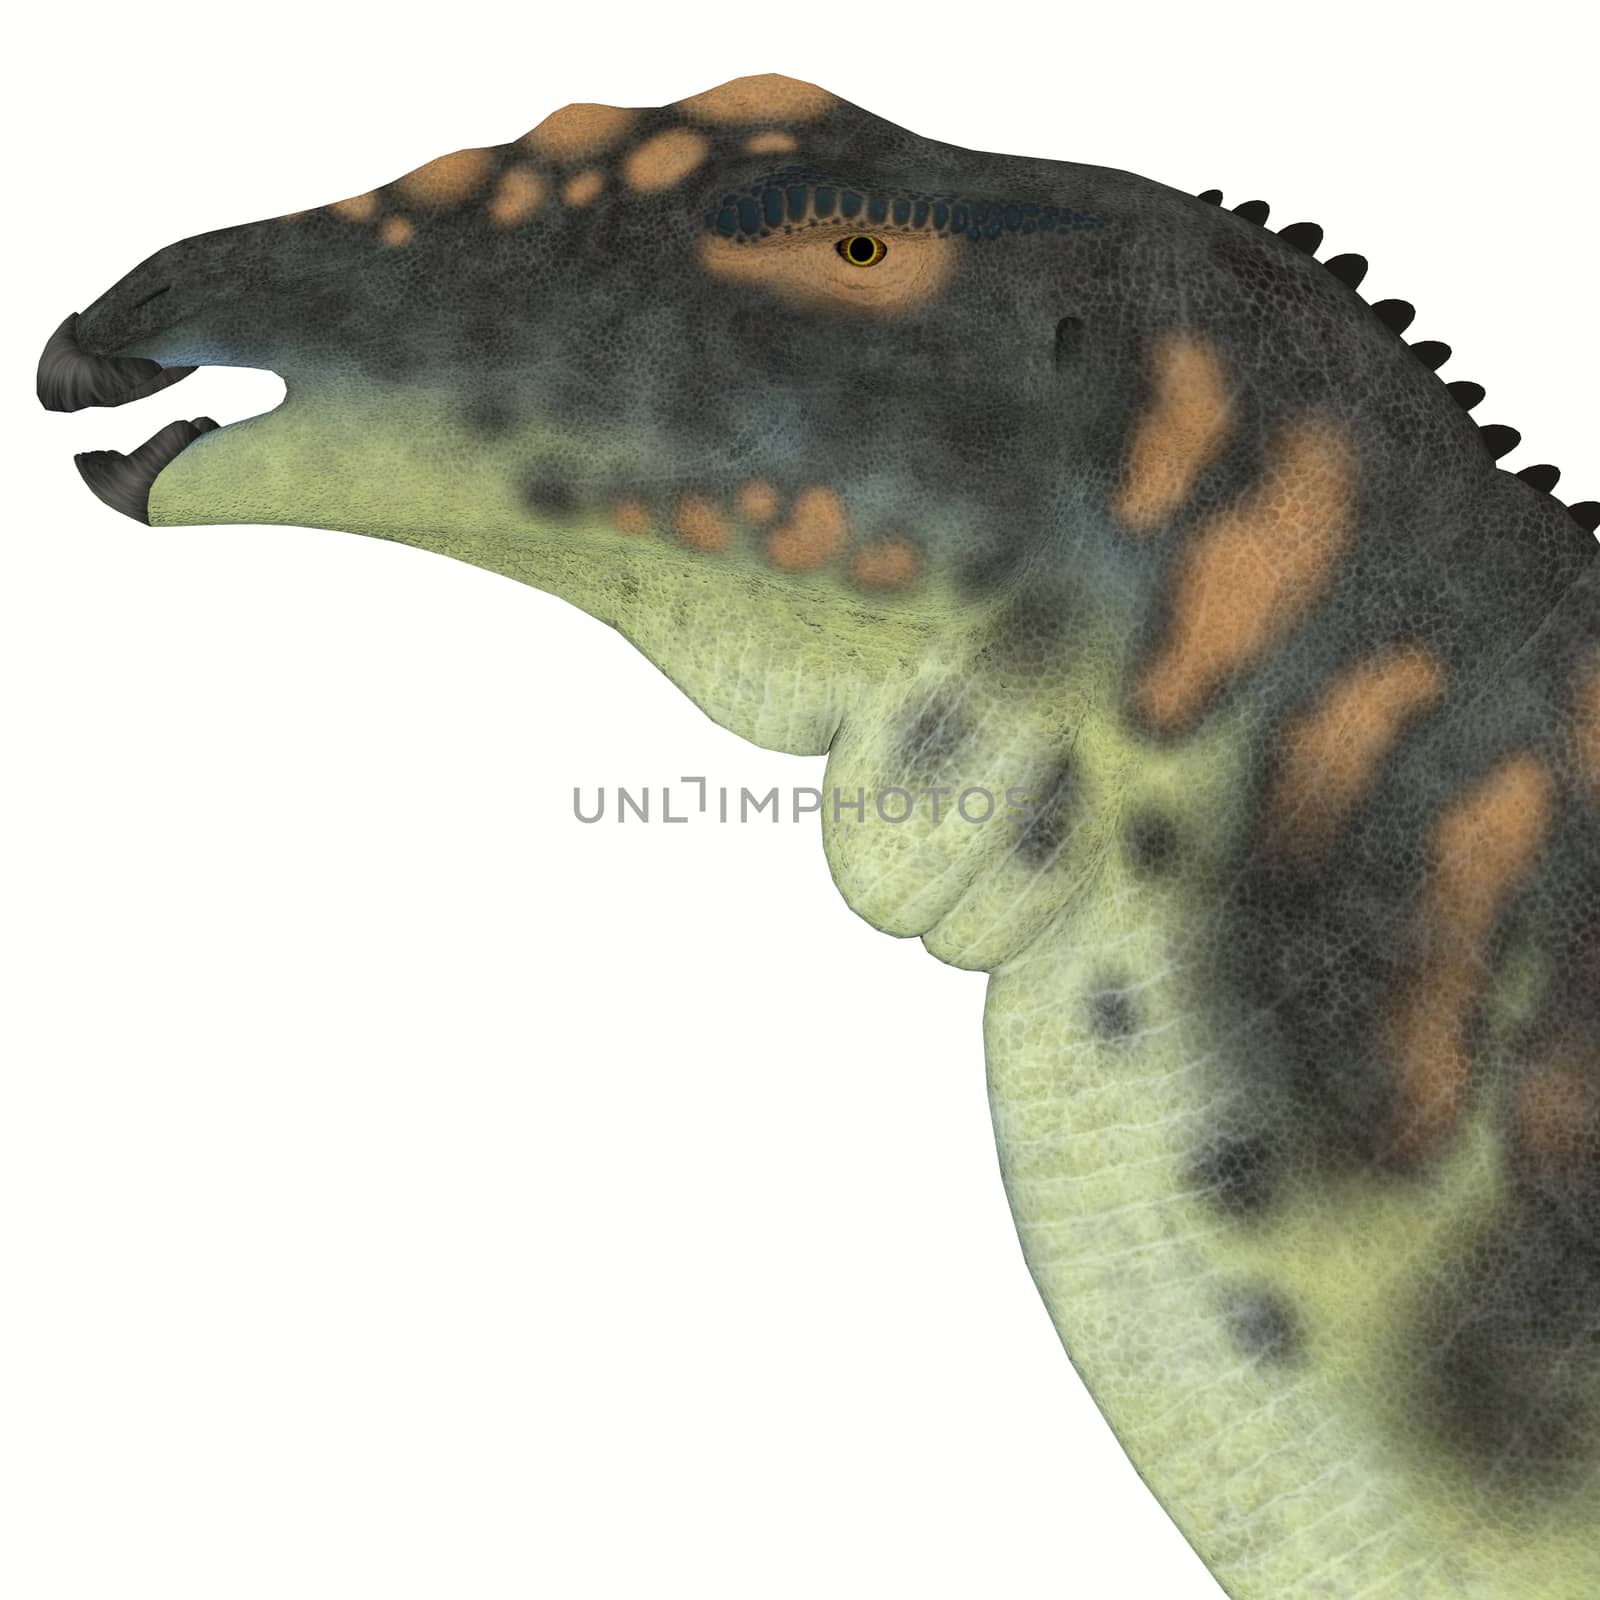 Ouranosaurus was a herbivorous hadrosaur dinosaur that lived during the Cretaceous Period of Africa.